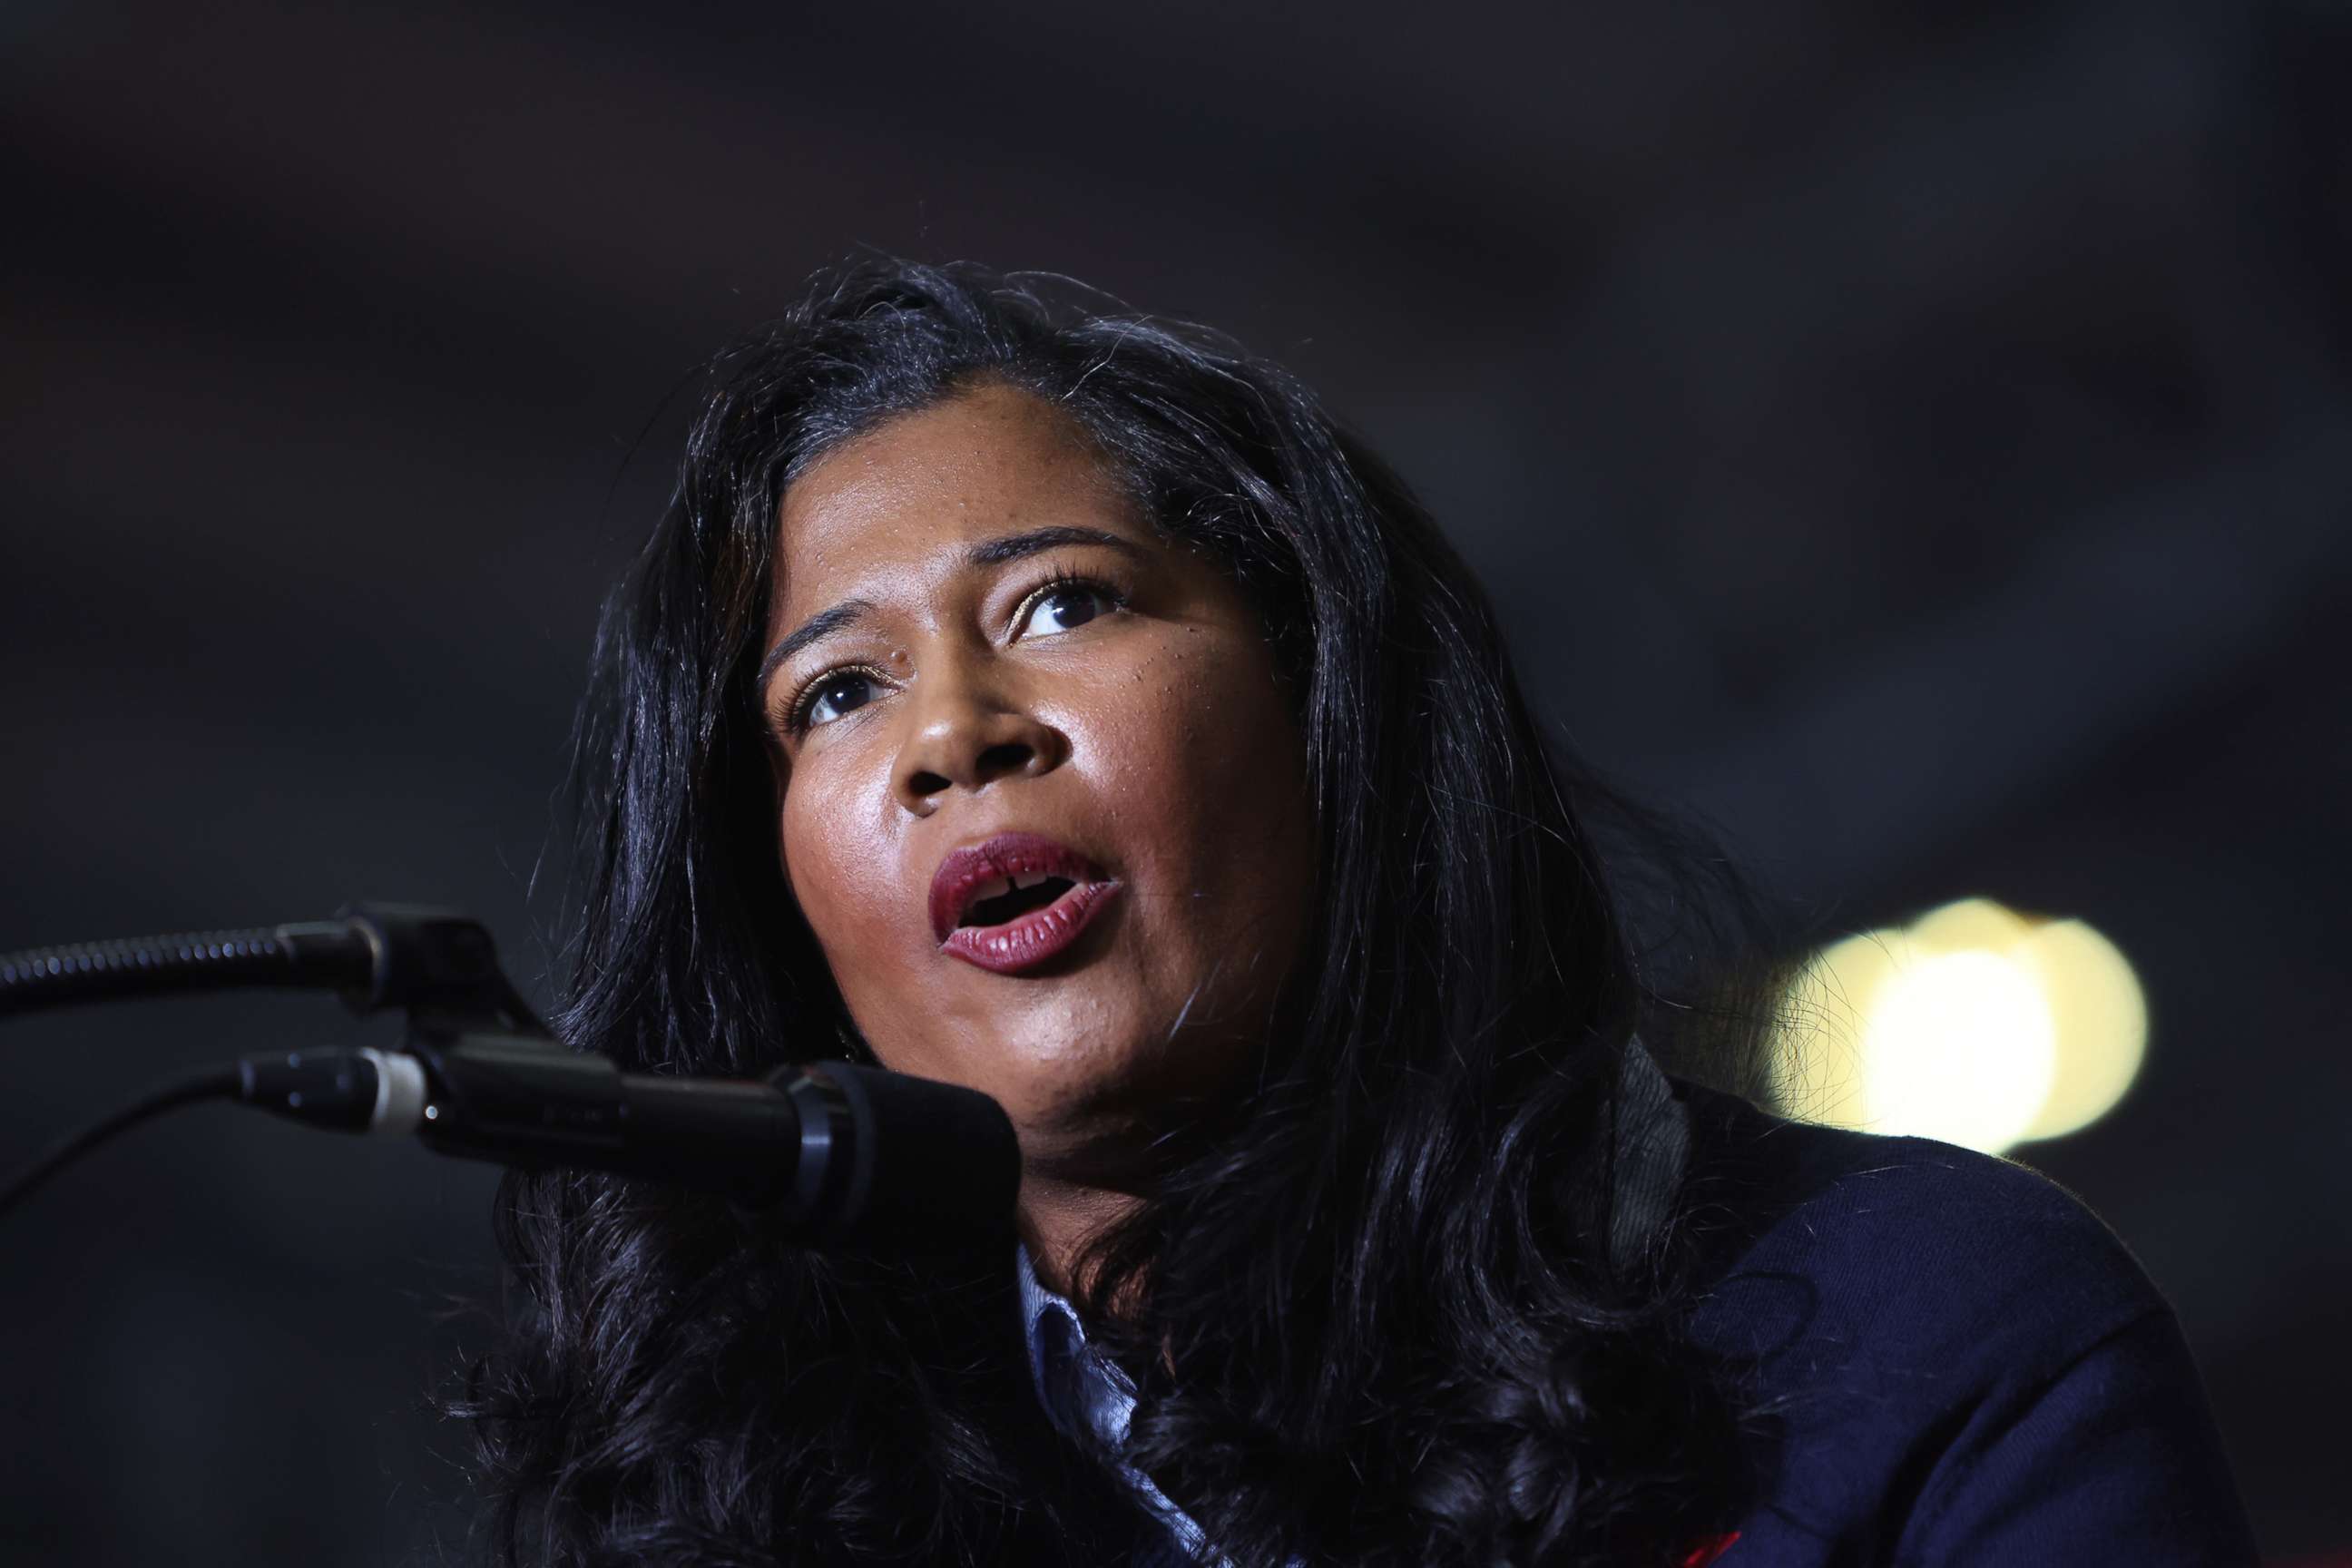 PHOTO: Kristina Karamo, who is running for Michigan Republican party's nomination for secretary of state, speaks at a rally hosted by former President Donald Trump near Washington, Mich., April 02, 2022.